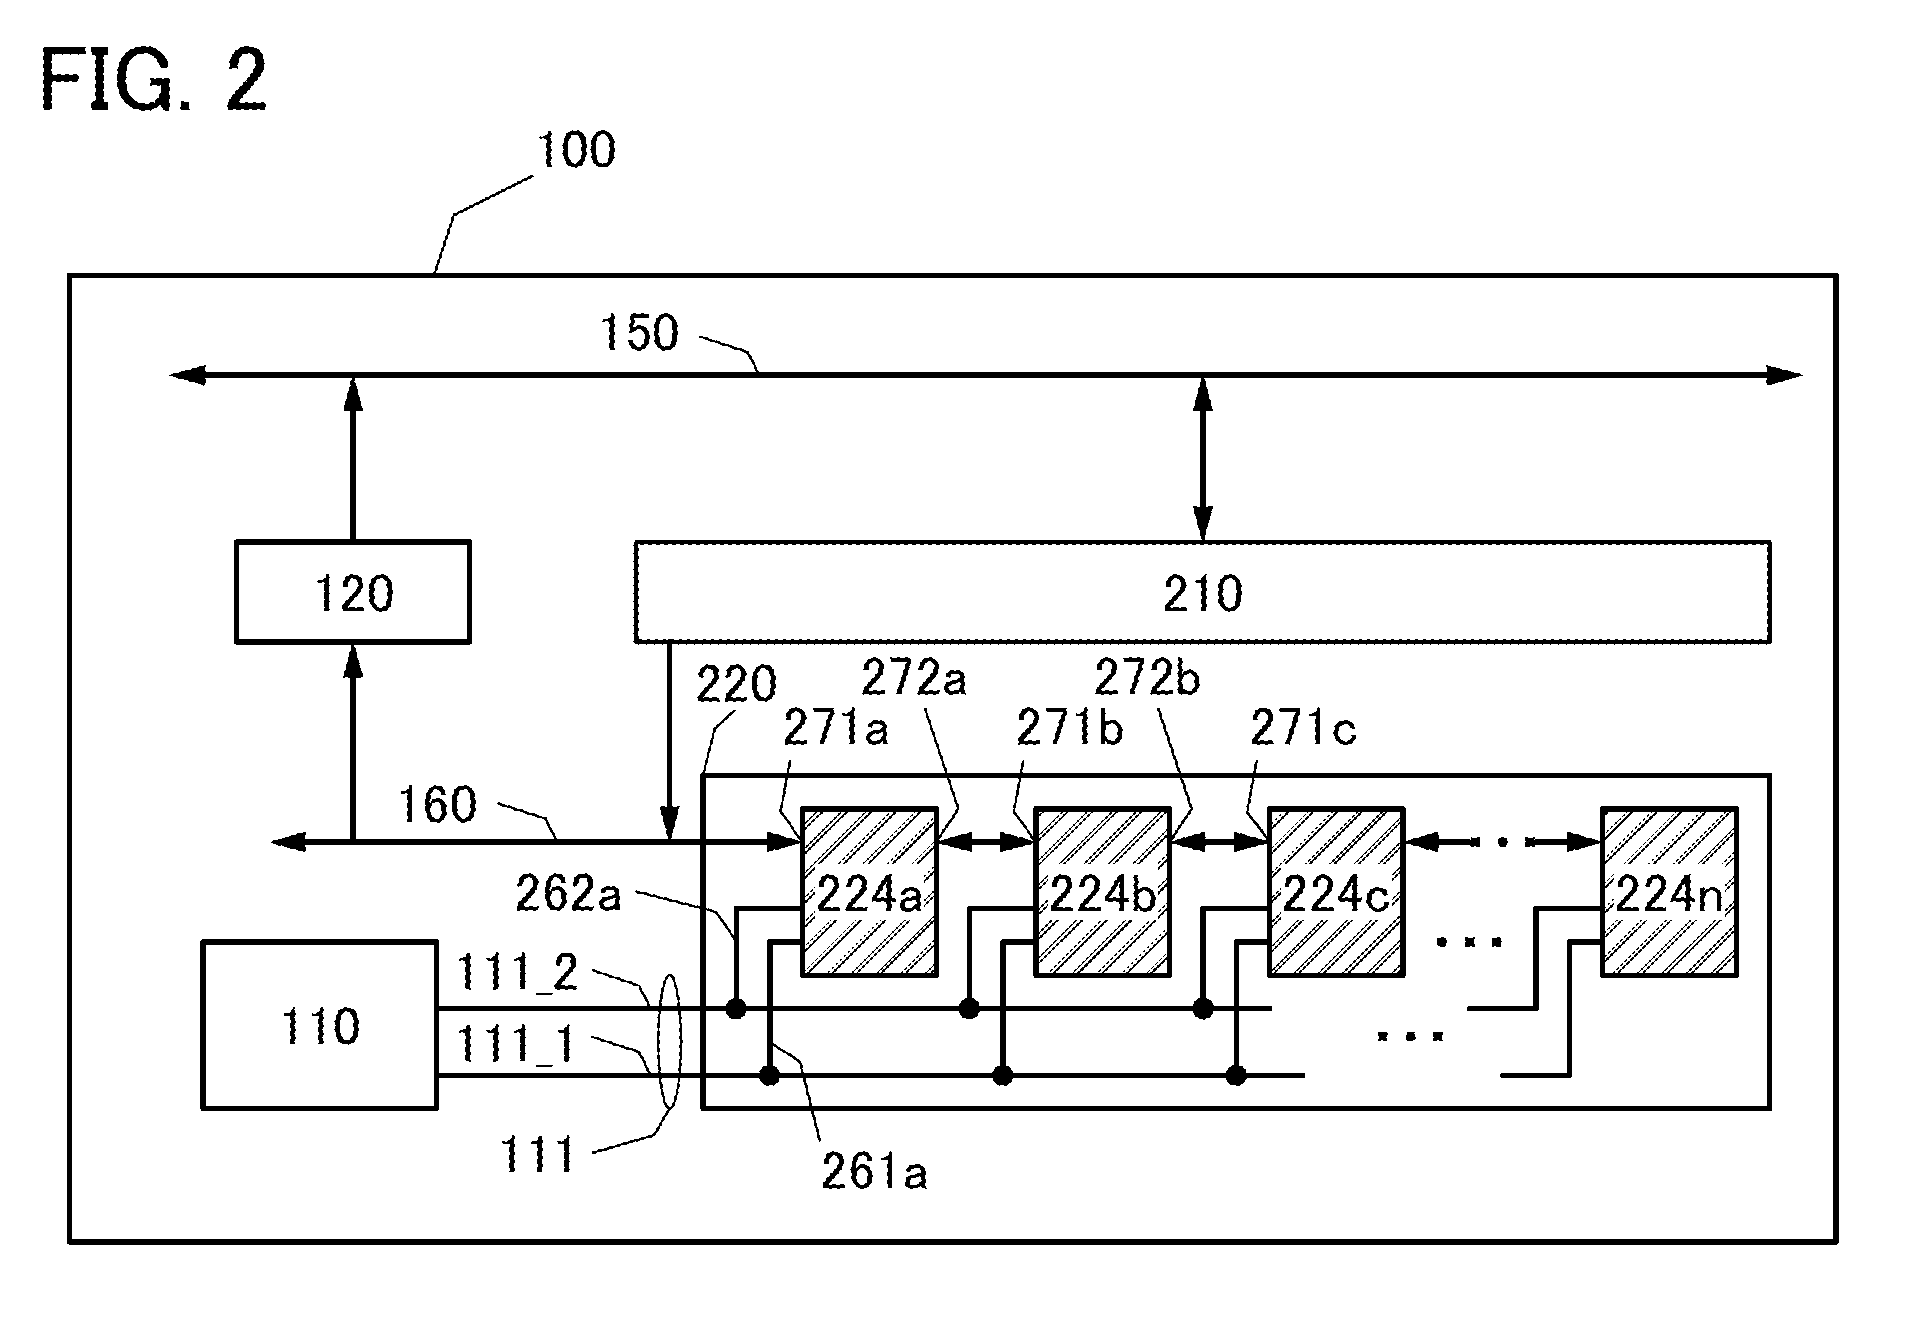 High speed processing unit with non-volatile register